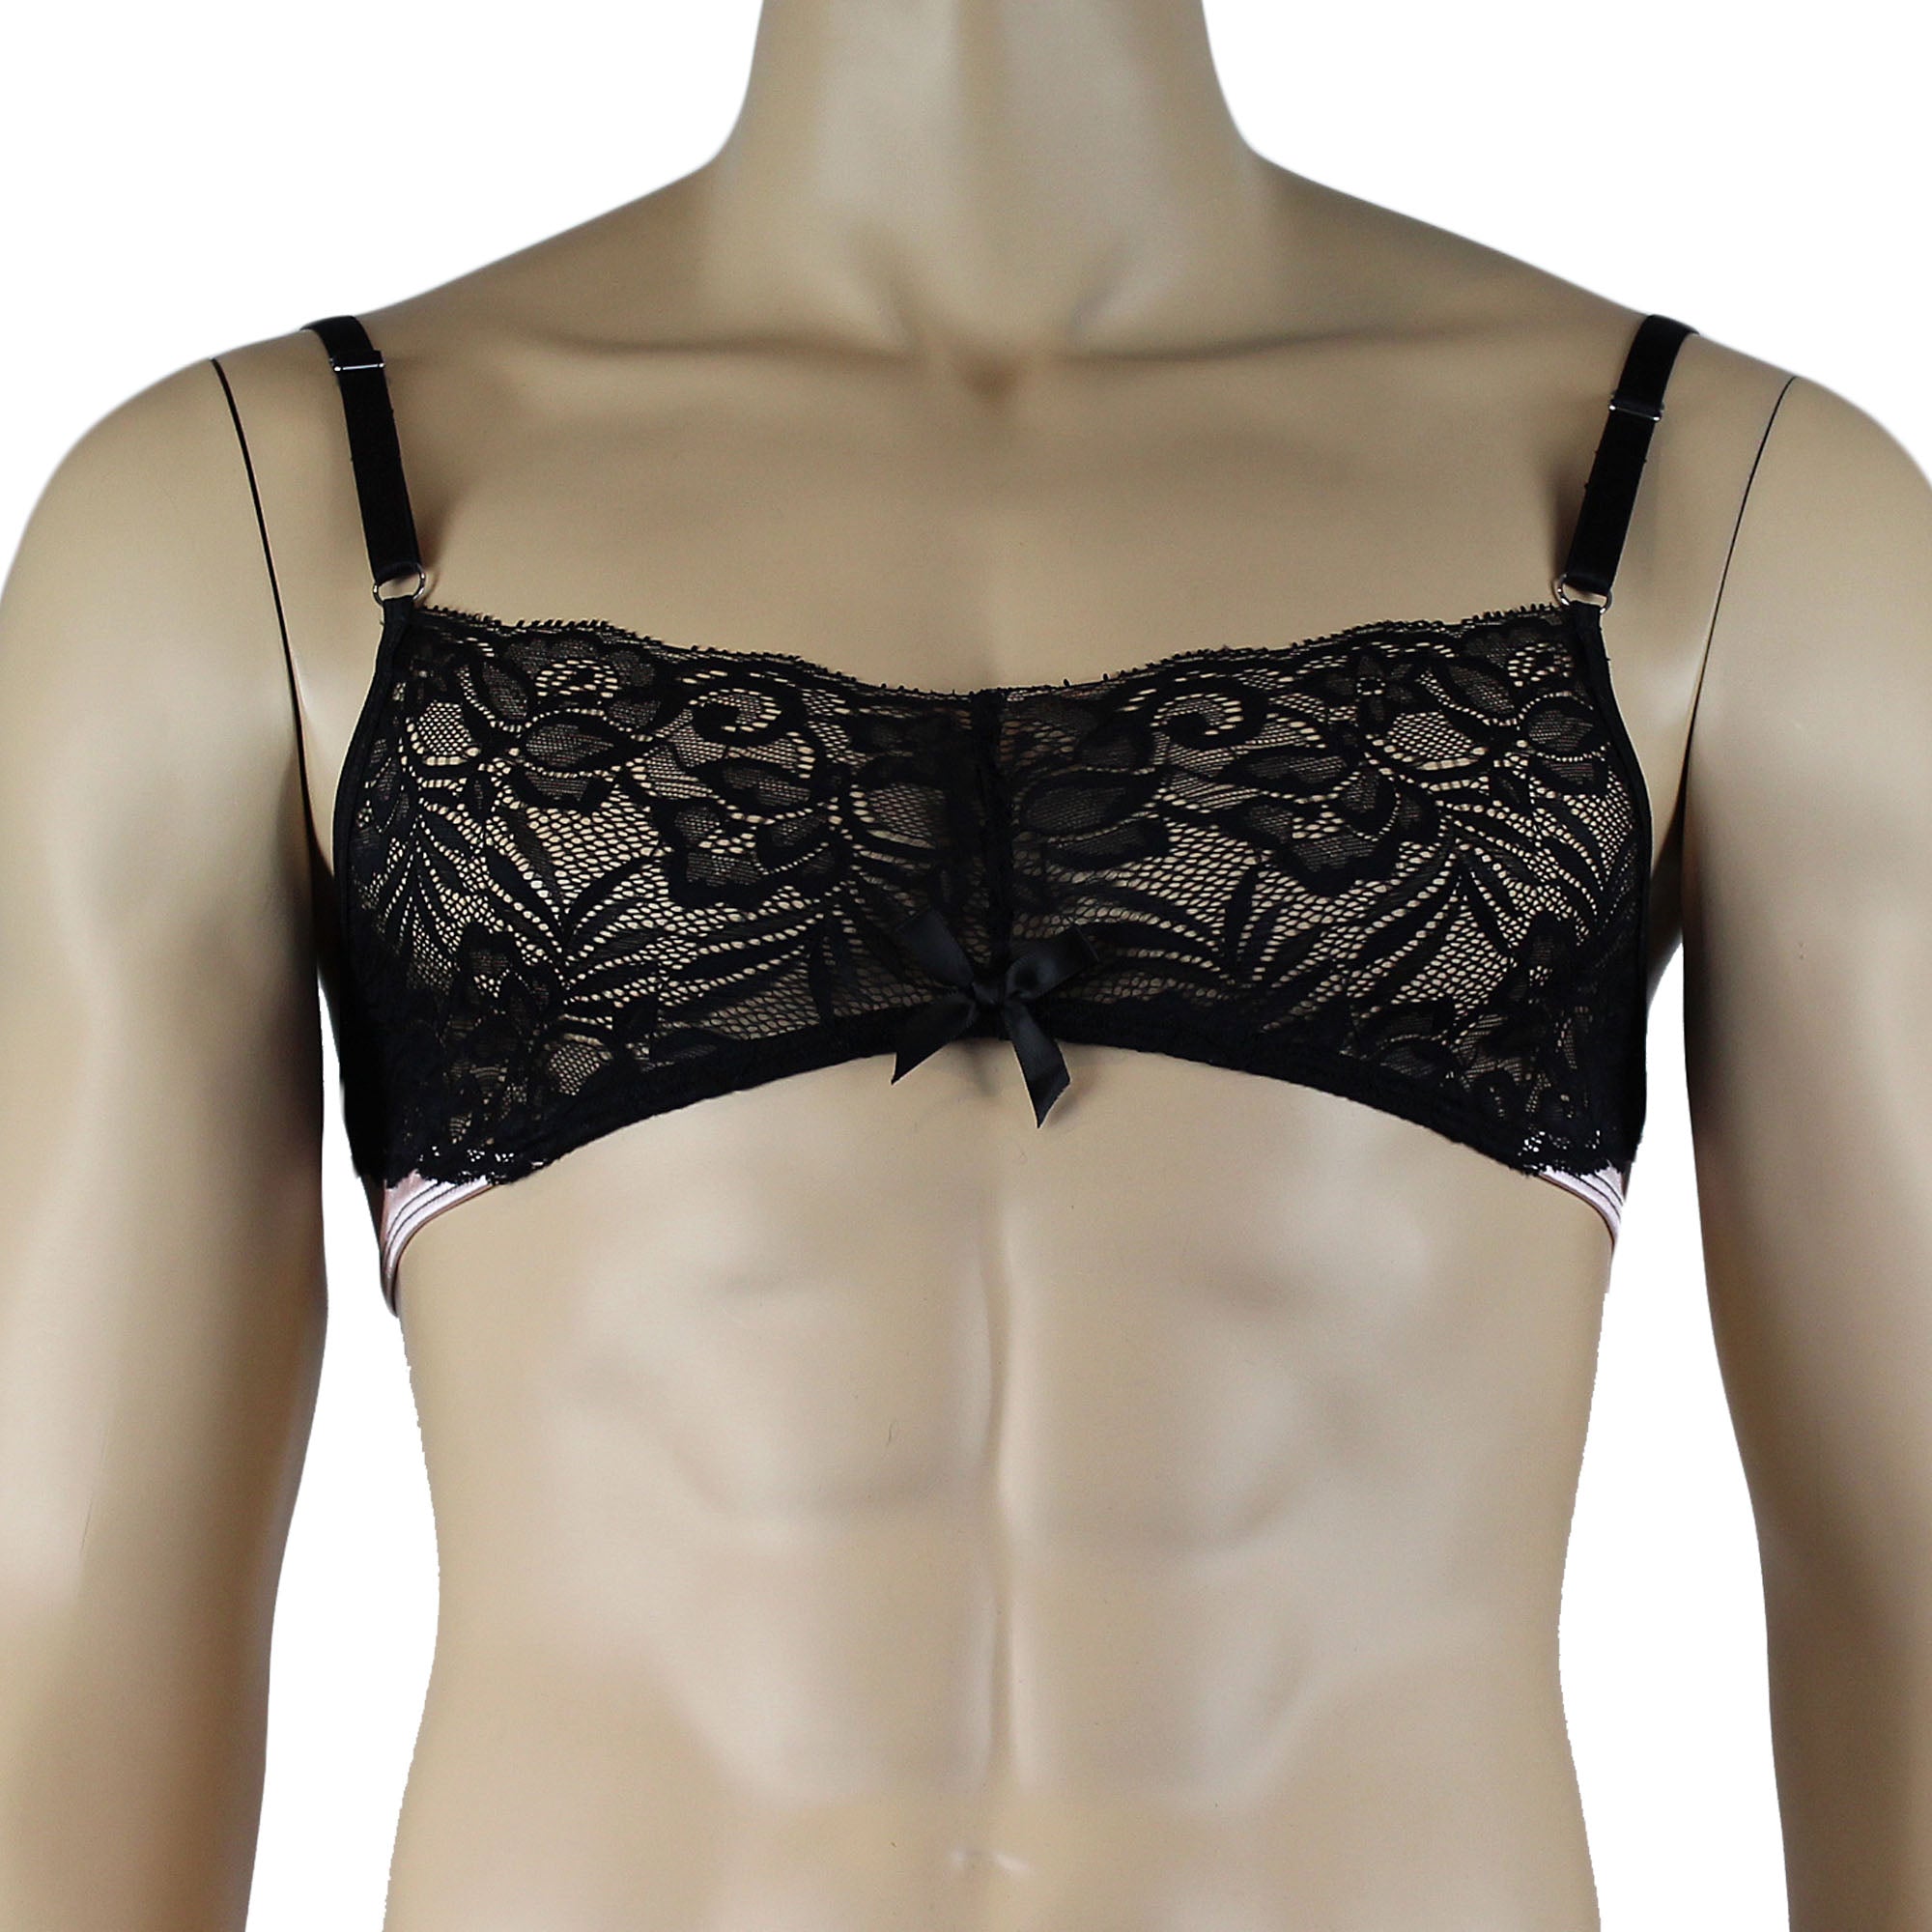 Mens Risque Bra Top and Thong Light Pink and Black Lace